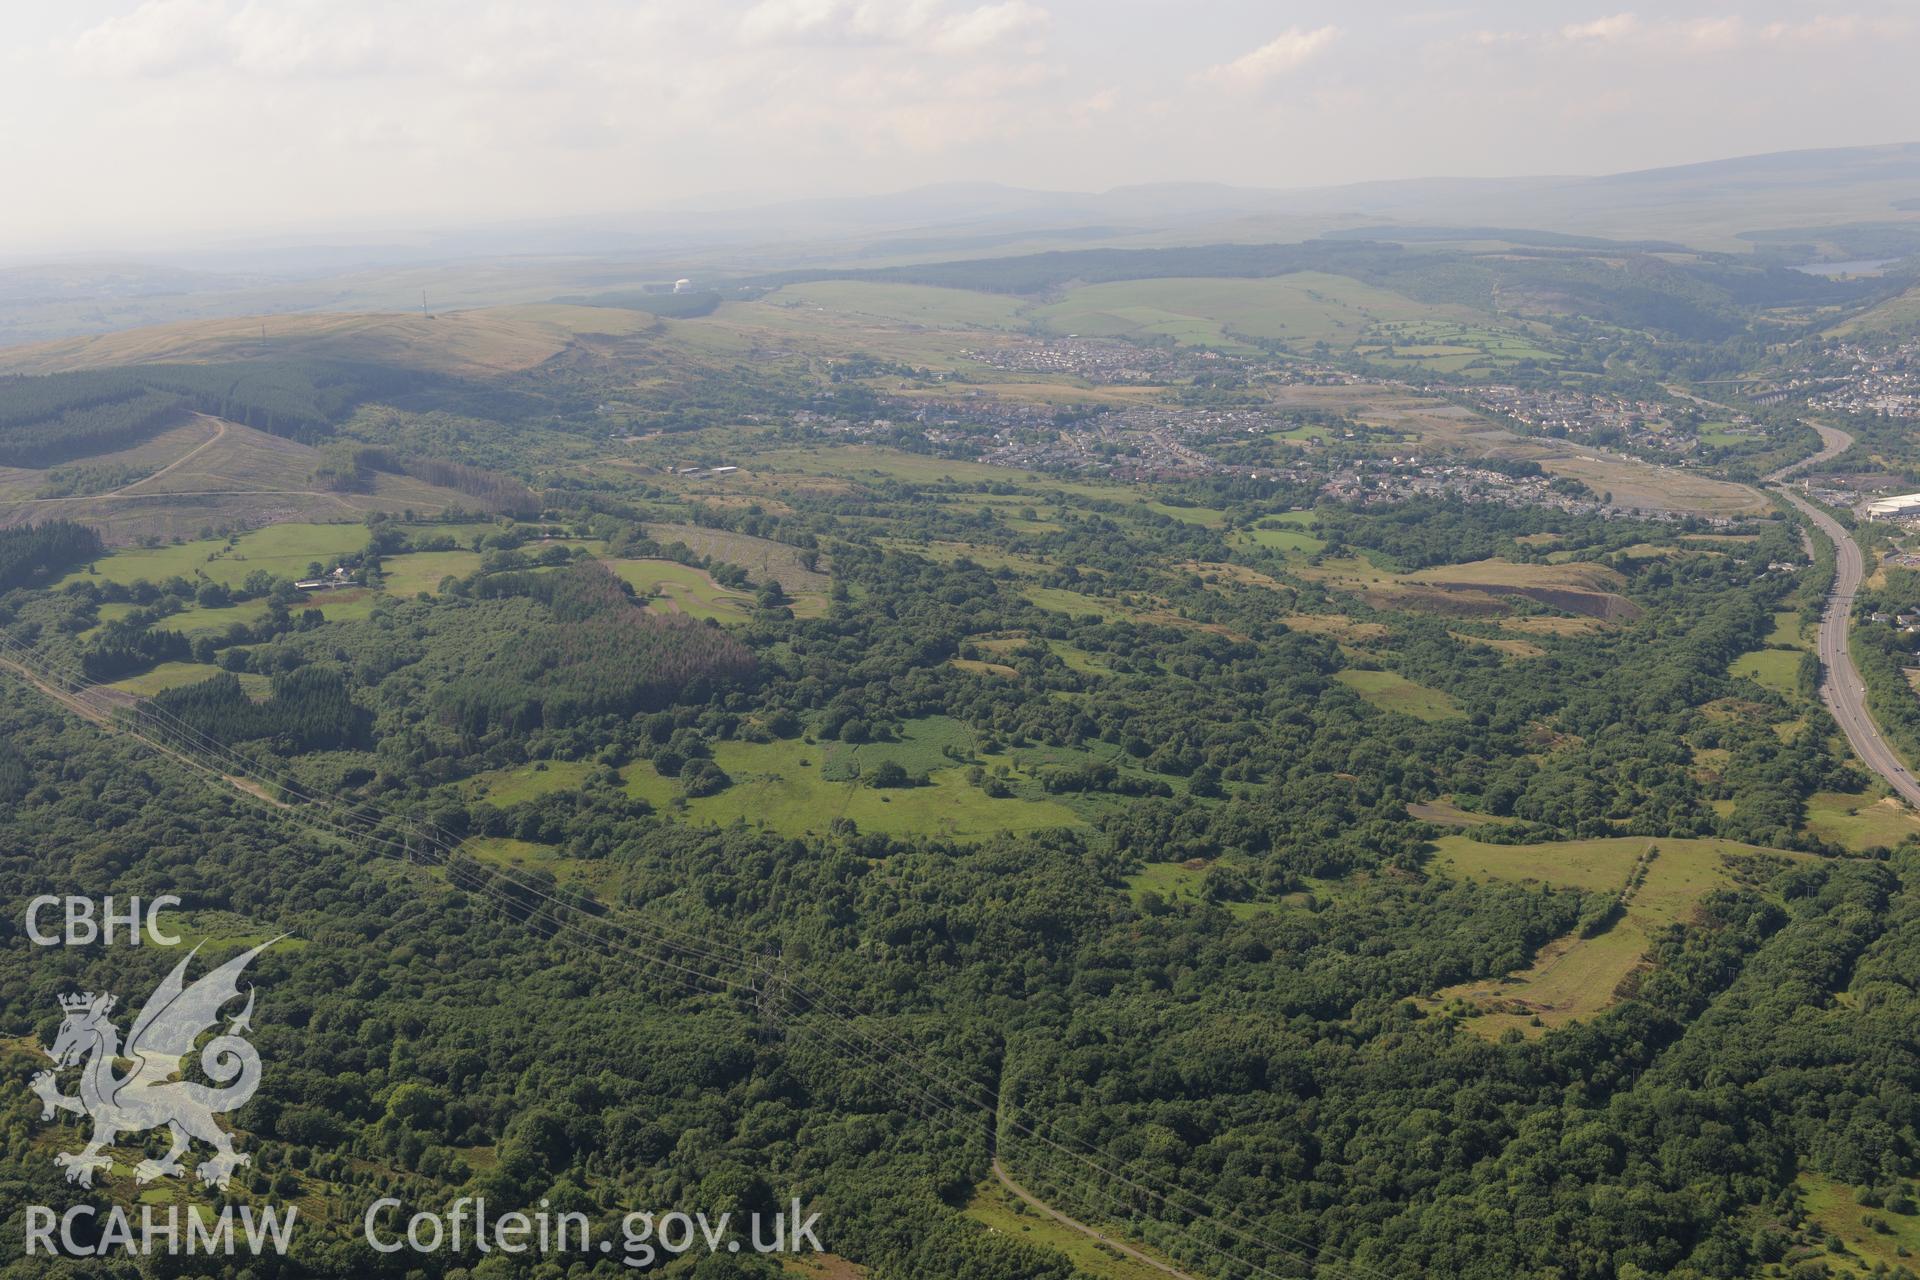 General view of the site of Cwm Pit colliery, with Merthyr Tydfil beyond. Oblique aerial photograph taken during the Royal Commission?s programme of archaeological aerial reconnaissance by Toby Driver on 1st August 2013.